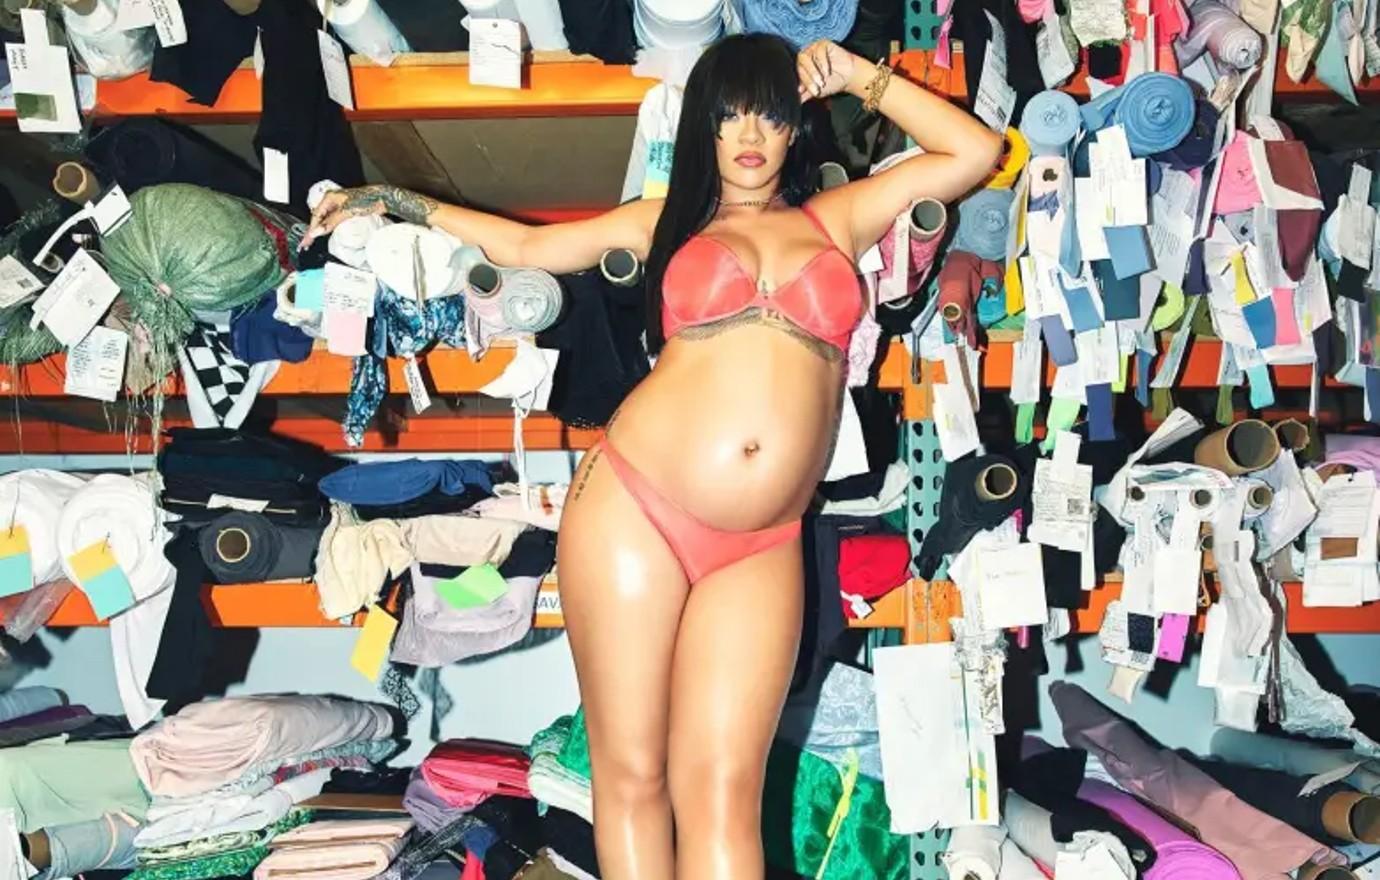 Rihanna Wears Lingerie While Showing Off Her Baby Bump: Photos